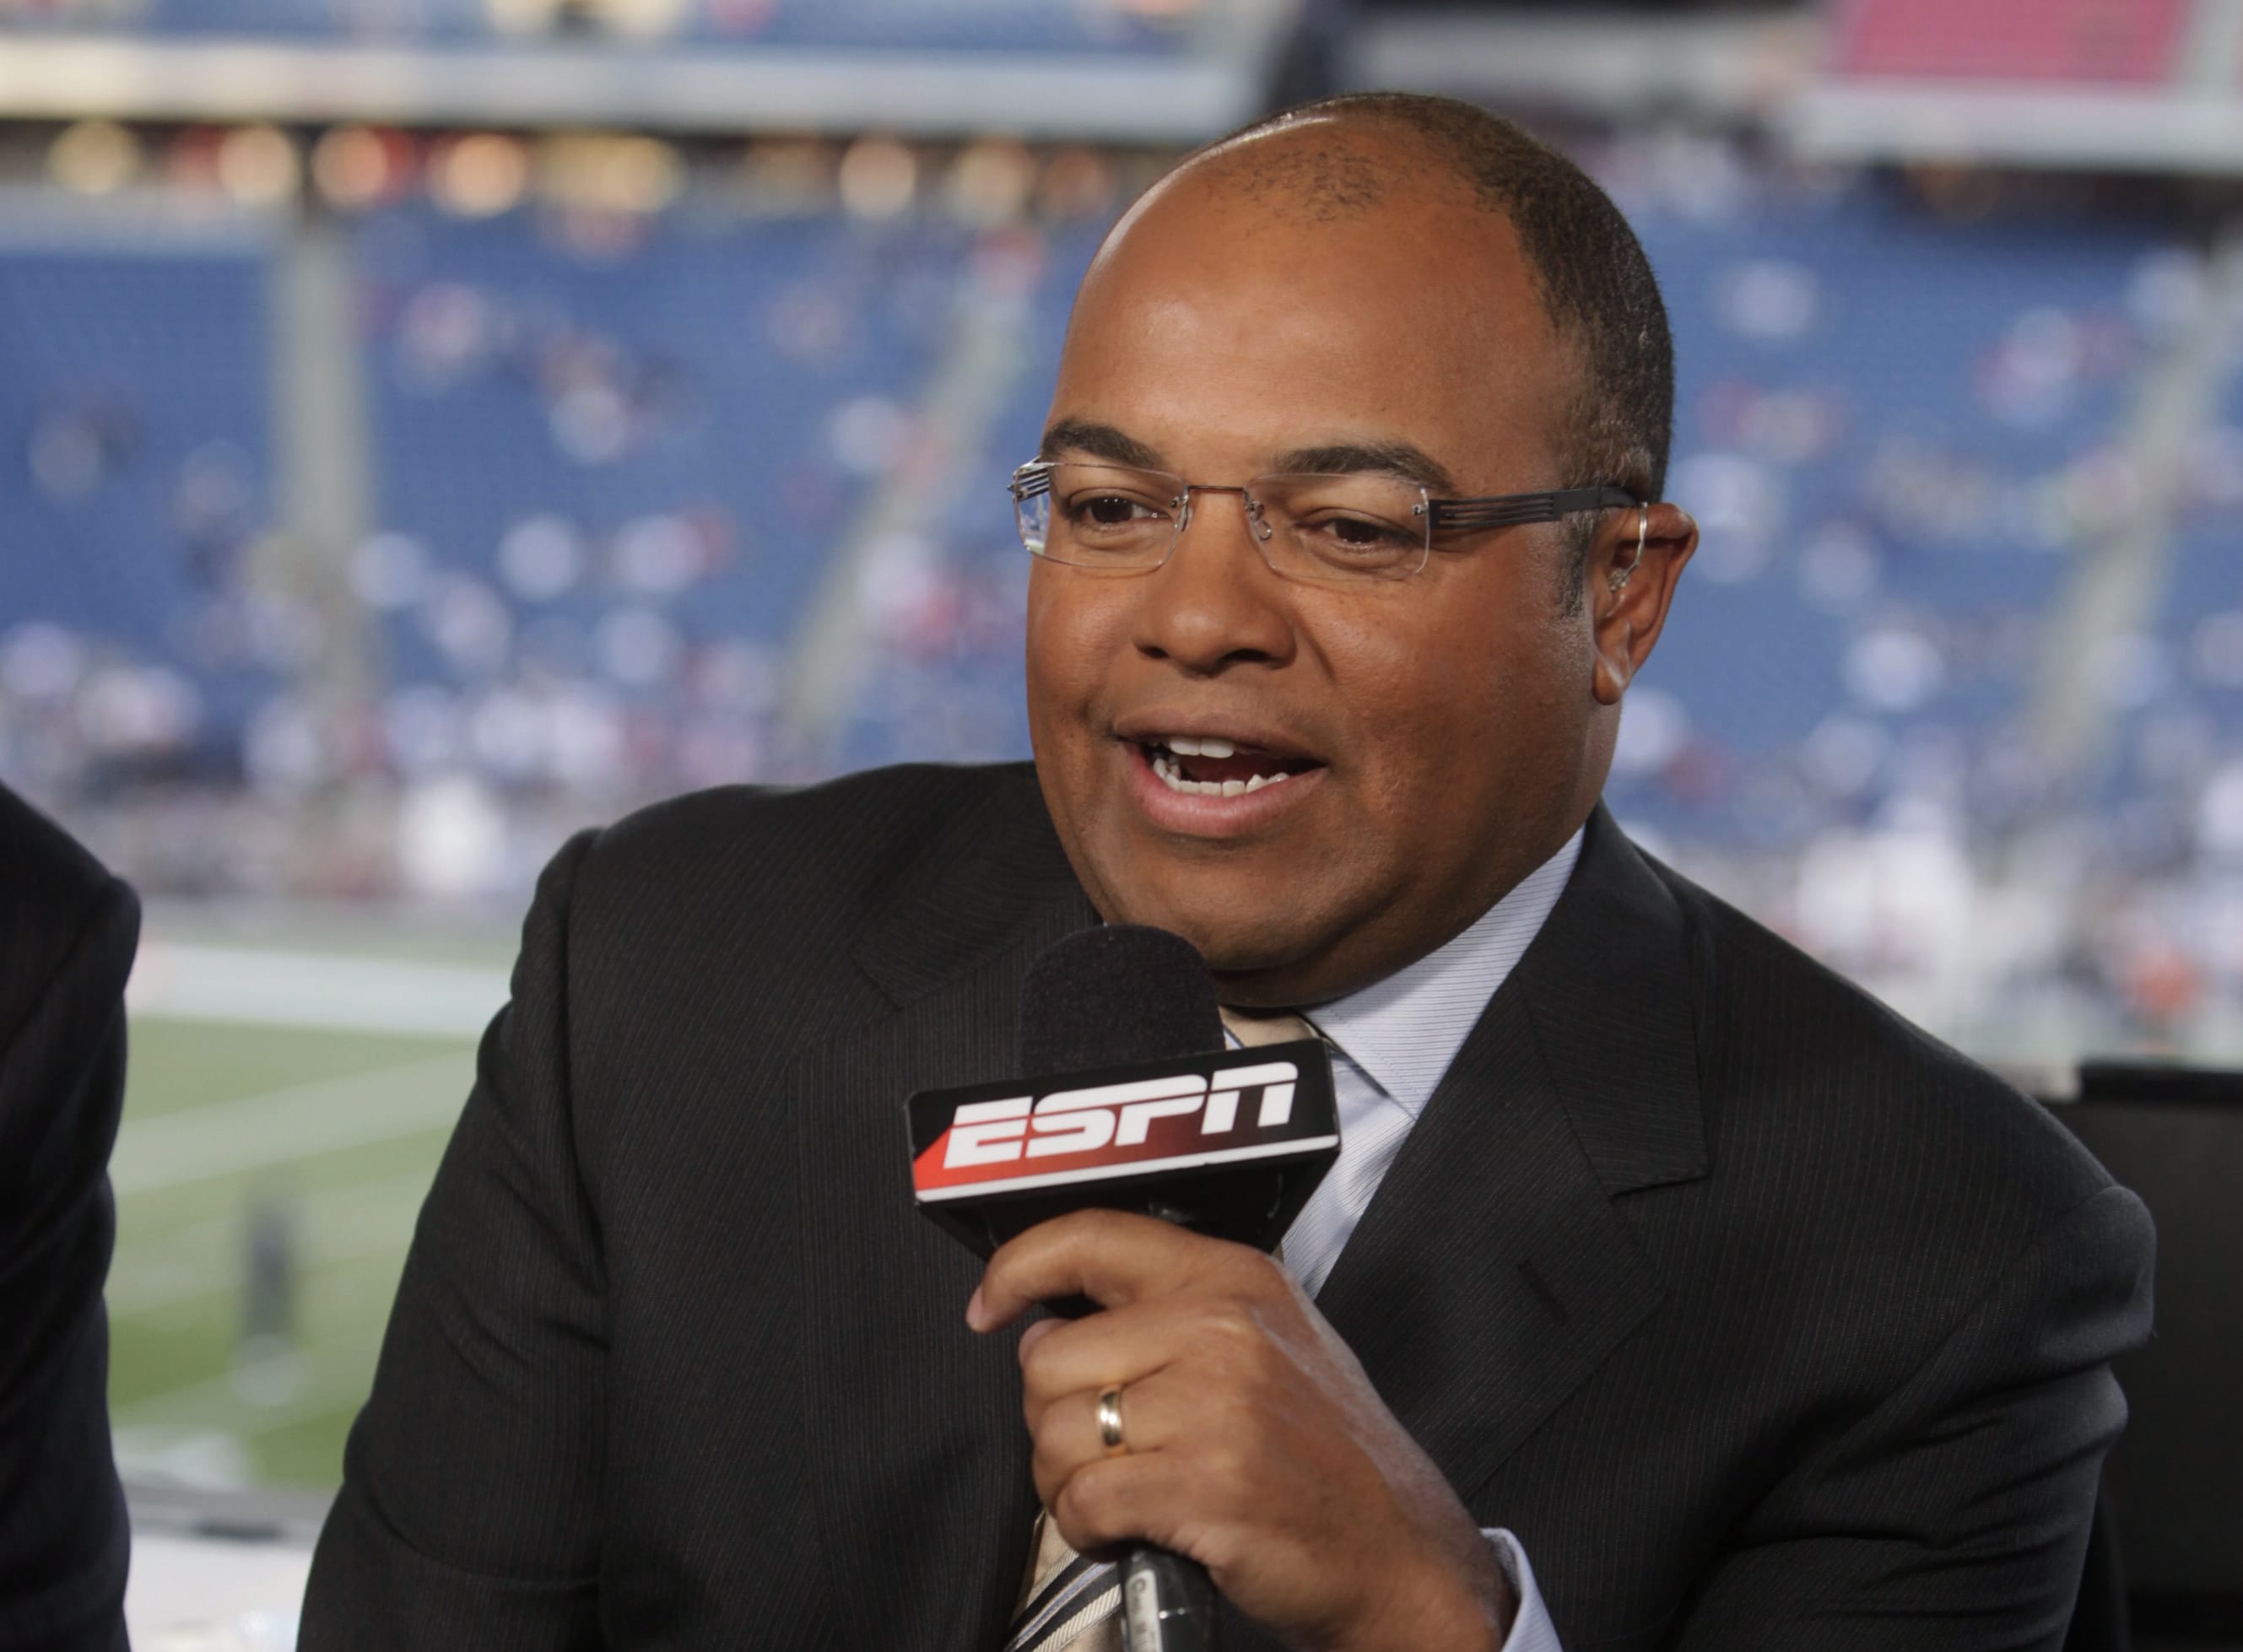 Broadcaster Mike Tirico pictured here in 2009.